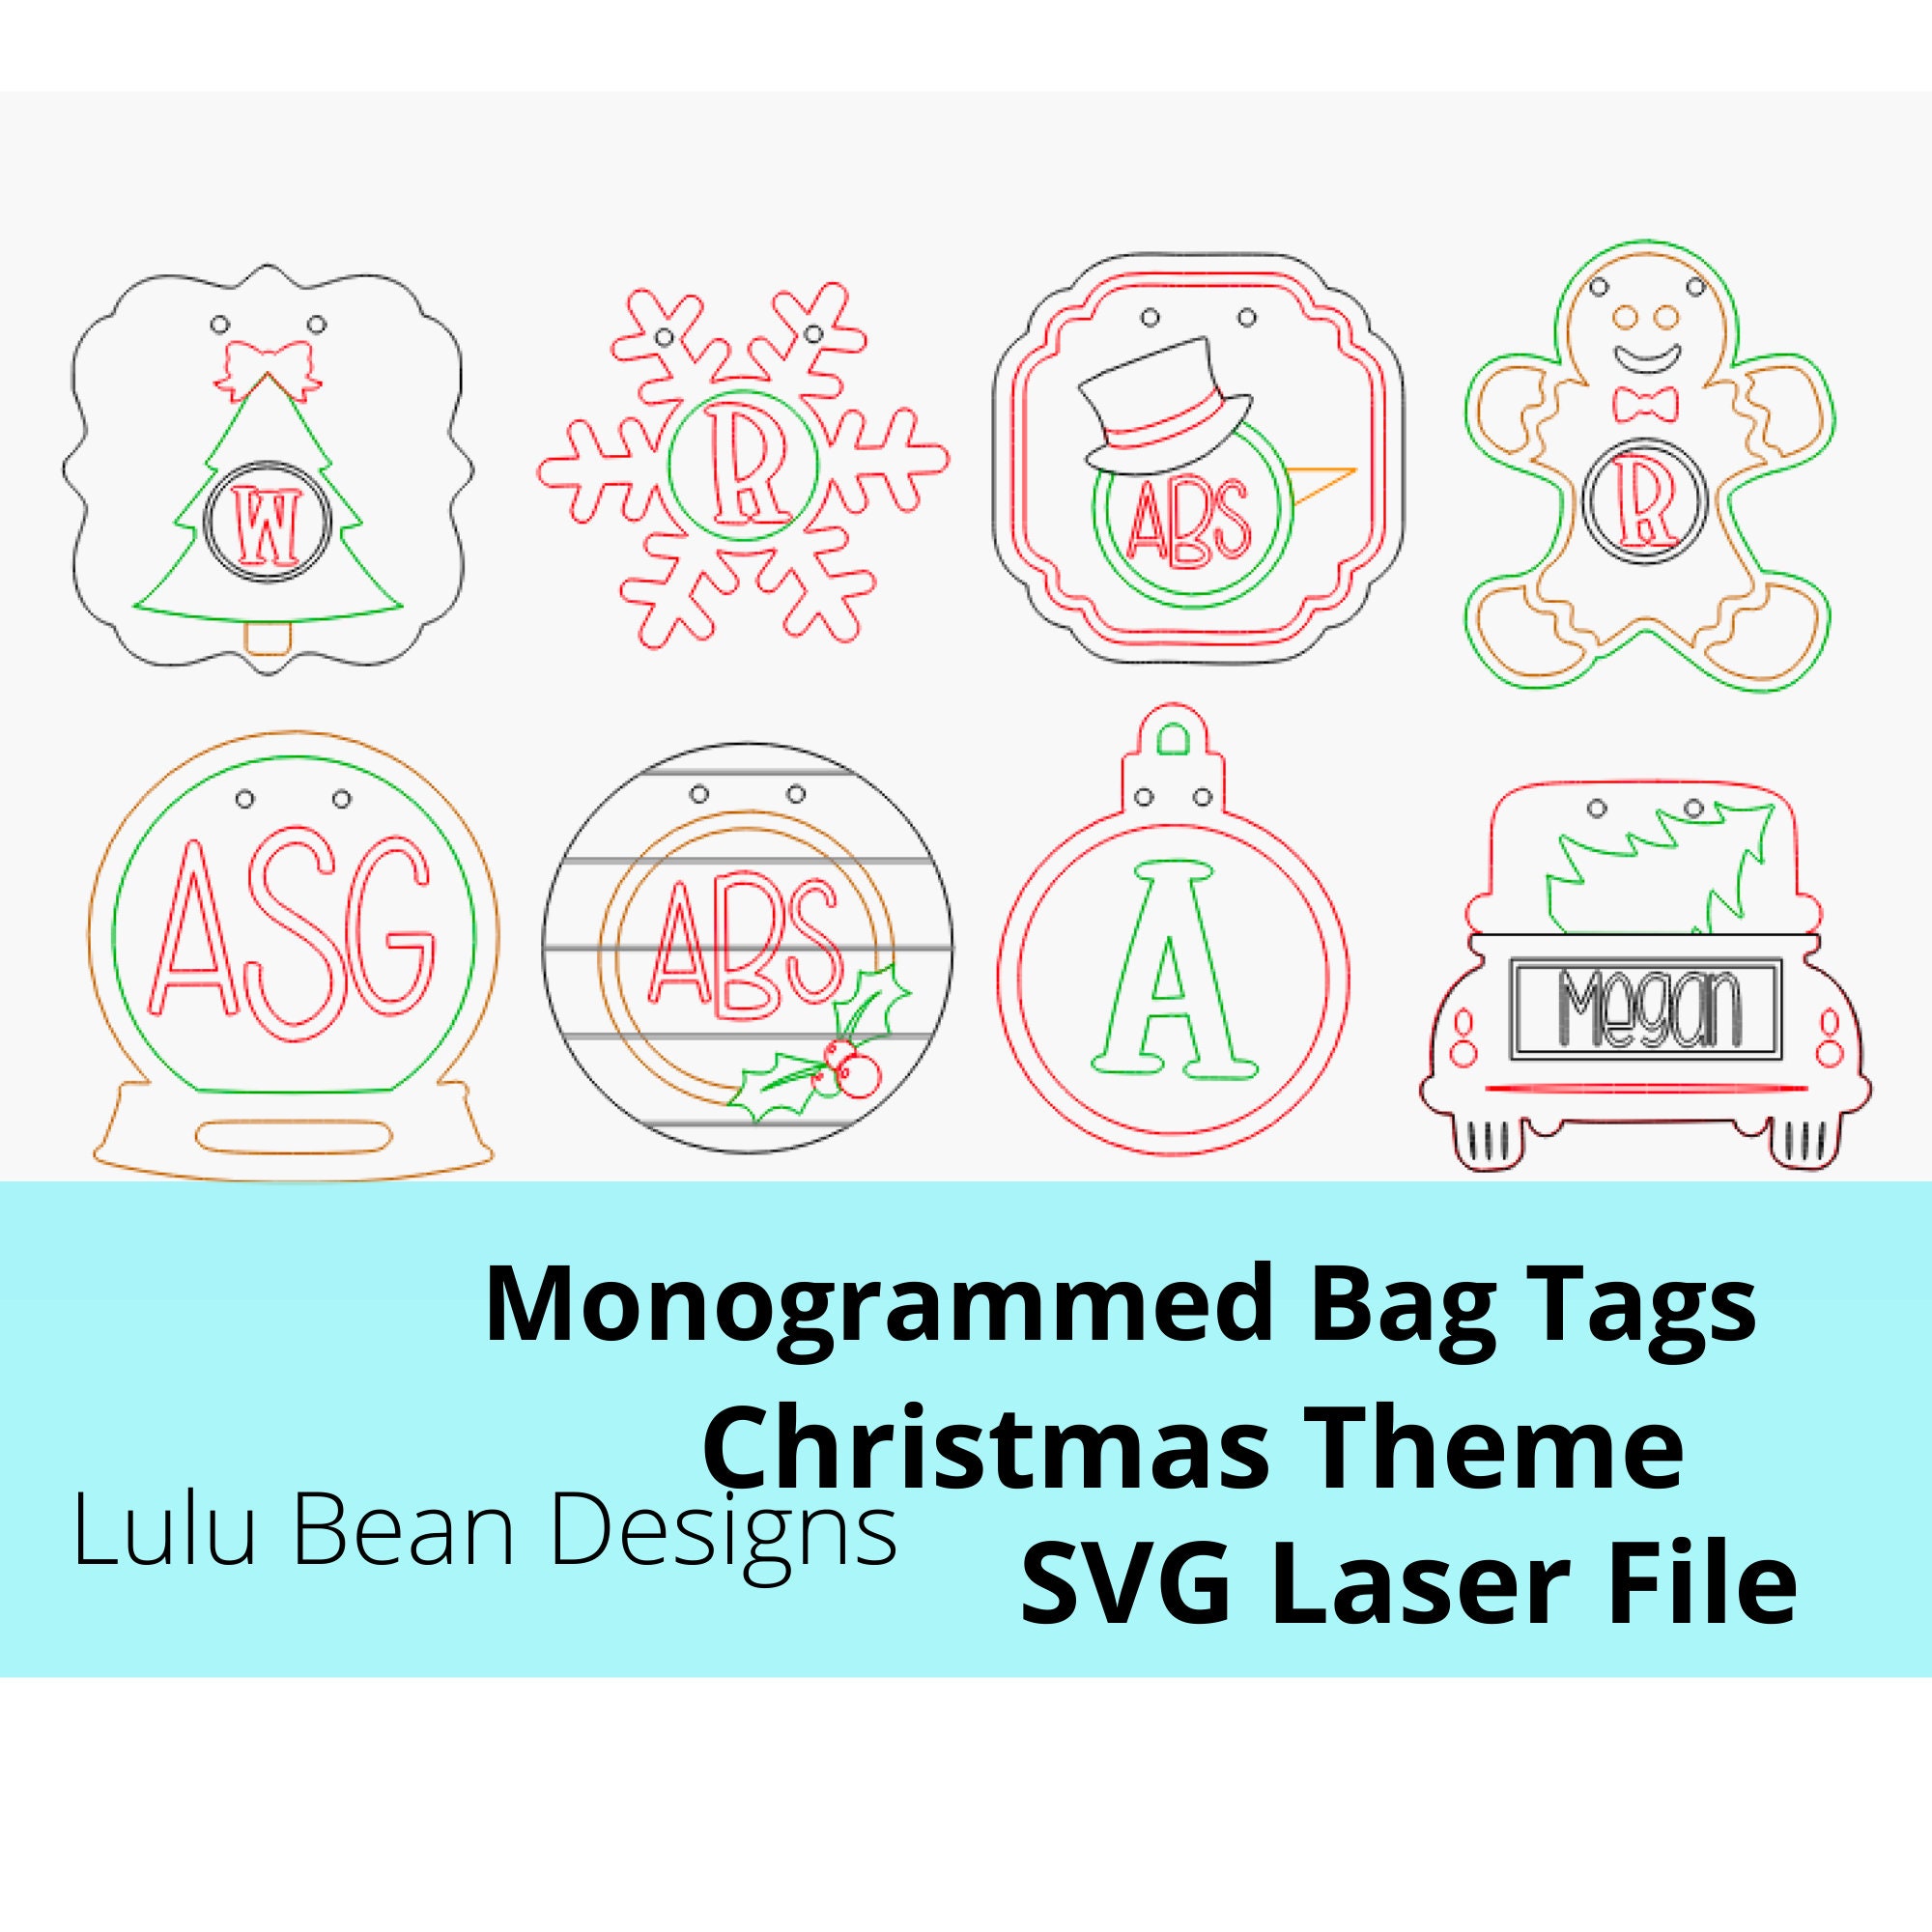 Red Truck Interchangeable Holiday Theme Bogg Bag Tags Monogram Monogrammed  Kit Wood Glowforge SVG File Digital Cut Laser Cutting